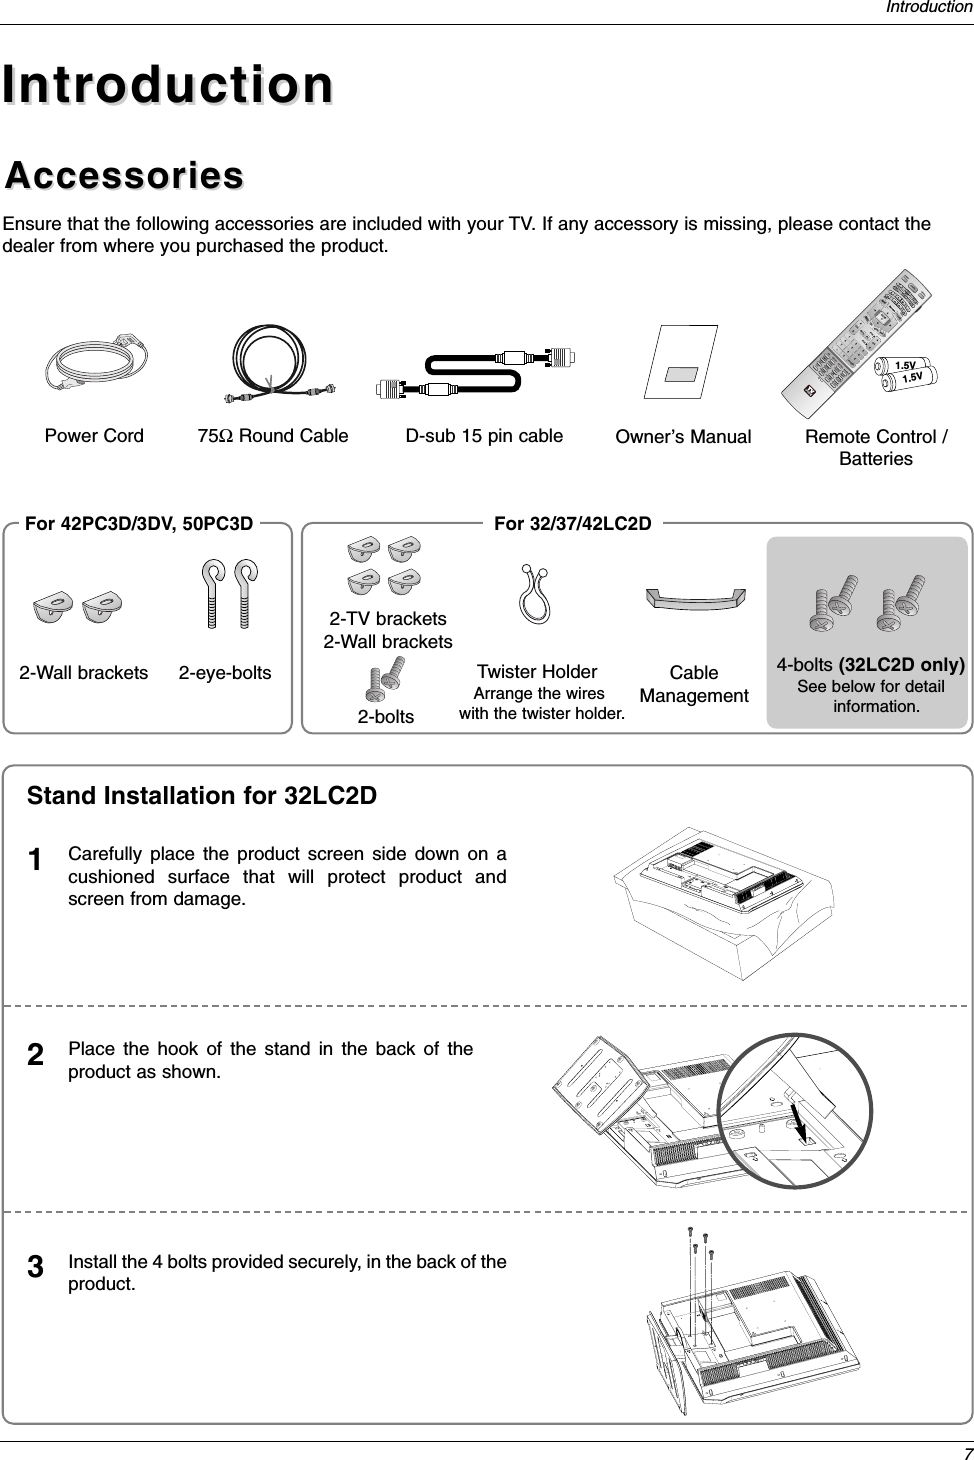 7IntroductionAccessoriesAccessoriesIntroductionIntroductionOwner’s Manual75ΩRound CablePower CordEnsure that the following accessories are included with your TV. If any accessory is missing, please contact thedealer from where you purchased the product.1.5V1.5VTV INPUTTV/VIDEOVOLFLASHBKCHPOWER1 2 3     456    7809   ADJUSTRATIO SWAPTIMERPIP CH+PIP CH-PIPSAPCCM/C EJECTFREEZEAUTO DEMOEZ PIC APMEZ SOUNDPIP INPUTAUDIODAY -CABLEMENUMUTEPAGEPAGEFAVTV GUIDEVCRDAY+STBEXIT1394MARKTVDVDMODEINFOiENTERRemote Control /BatteriesD-sub 15 pin cable2-Wall brackets 2-eye-bolts2-TV brackets2-Wall brackets2-boltsFor 32/37/42LC2DFor 42PC3D/3DV, 50PC3DCarefully place the product screen side down on acushioned surface that will protect product andscreen from damage.1Place the hook of the stand in the back of theproduct as shown.2Install the 4 bolts provided securely, in the back of theproduct.3Stand Installation for 32LC2DTwister HolderArrange the wires with the twister holder.4-bolts (32LC2D only)See below for detailinformation.CableManagement